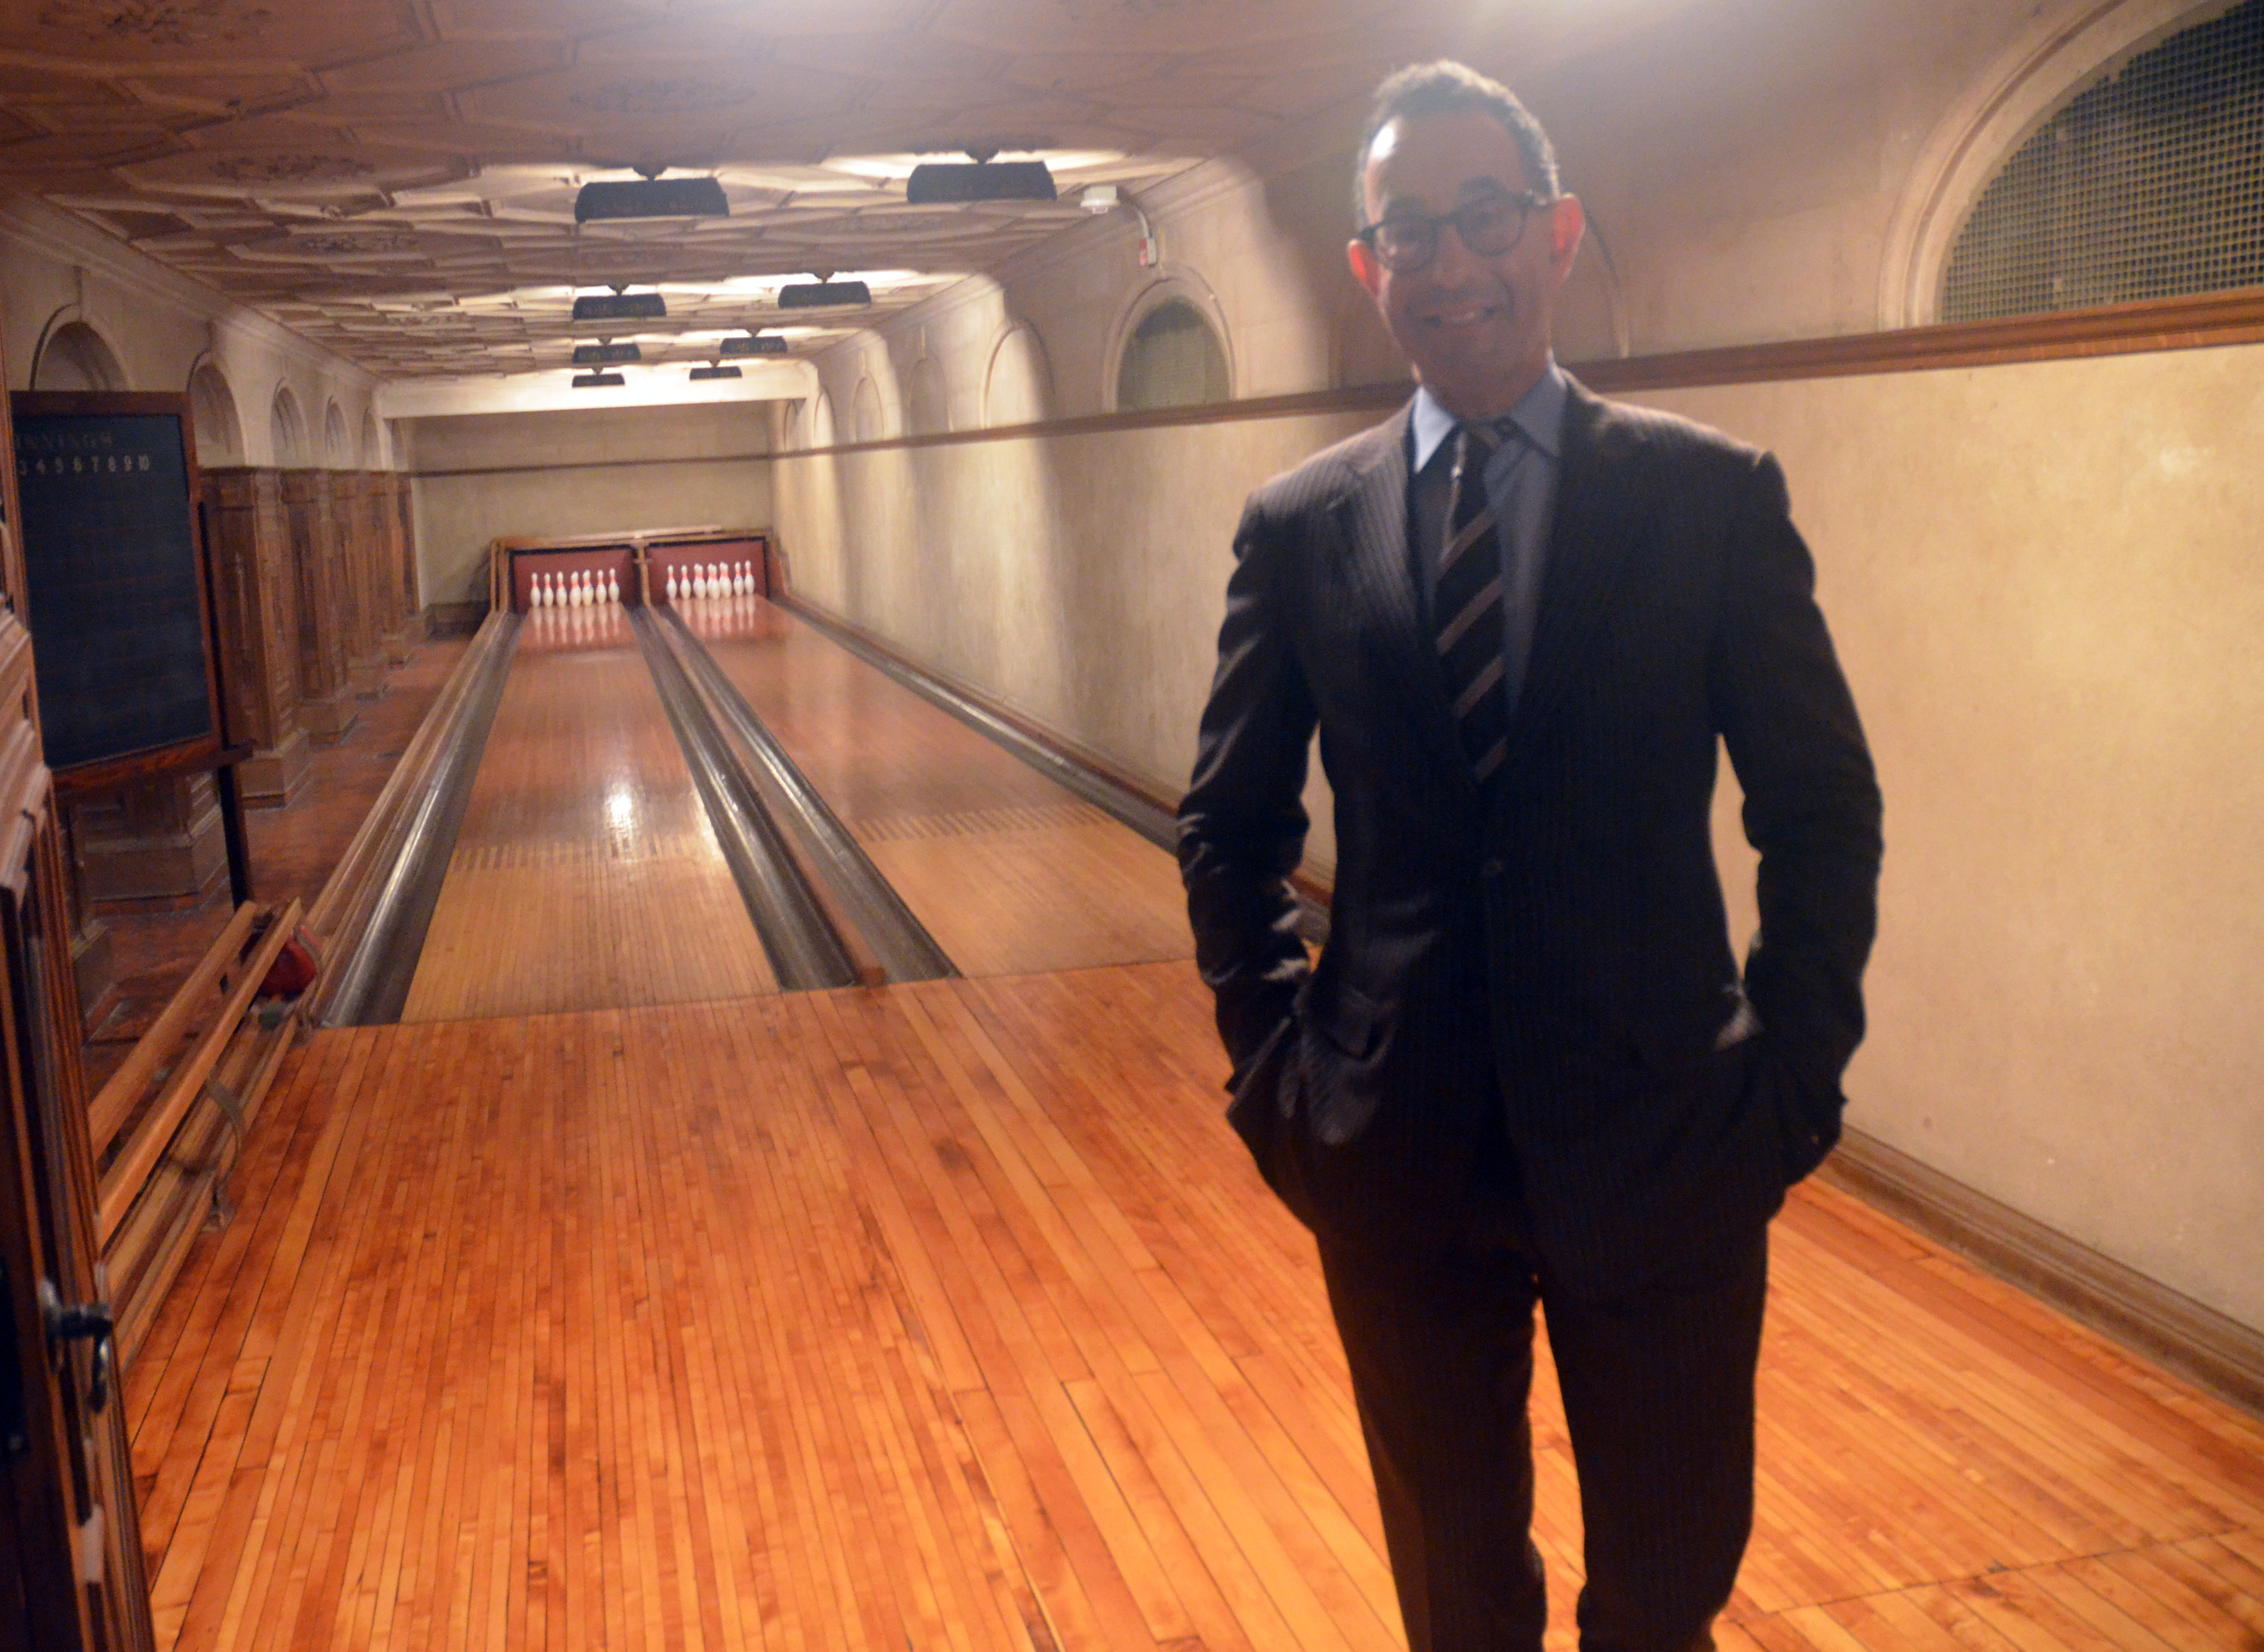 Colin Bailey poses for the camera at the Frick Collection bowling alley in late 2012 (credit: Evan Bindelglass / CBSNewYork)